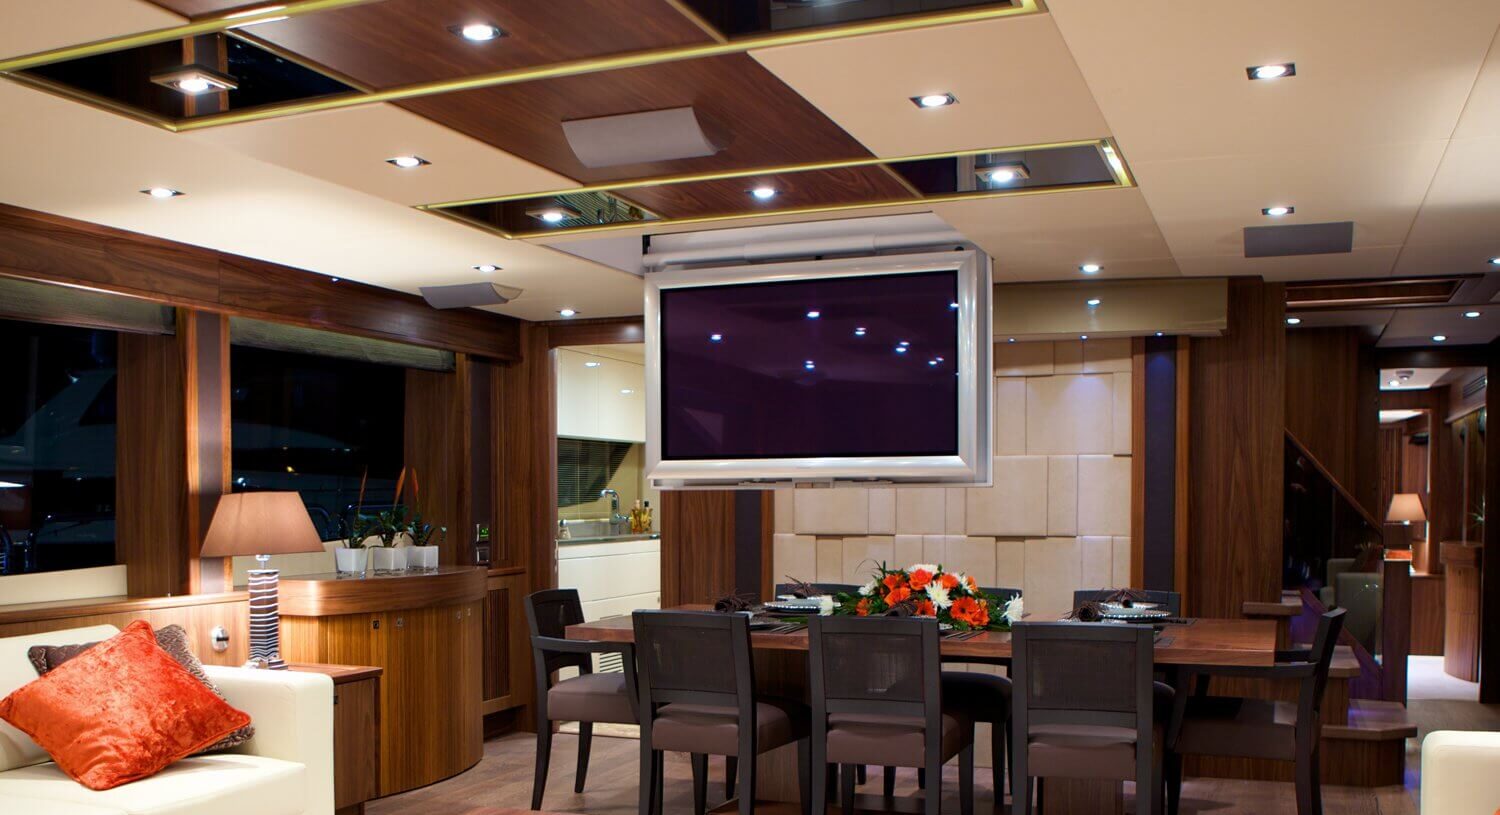 MDfx Ltd luxury yachts Interior Design by MDfx luxury on-board cinema with concealed tv screen in ceiling